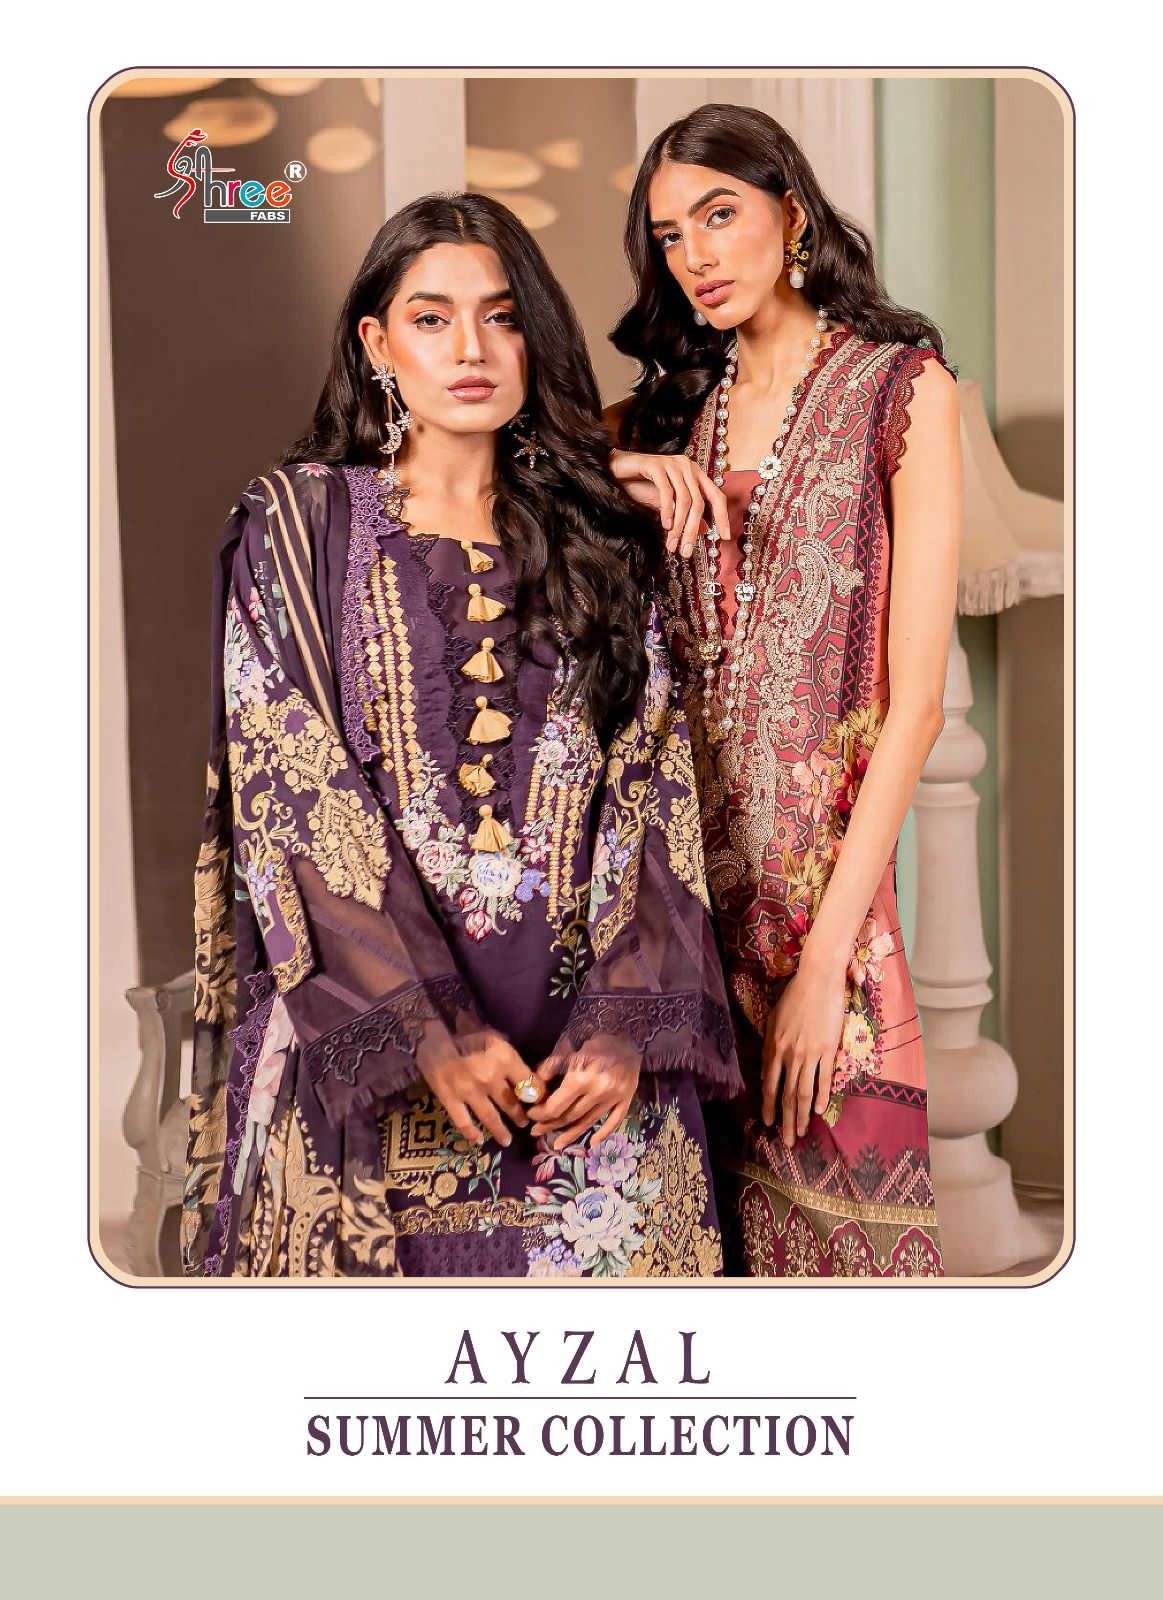 SHREE FABS AYZEL SUMMER COLLECTION COTTON PAKISTANI SUITS